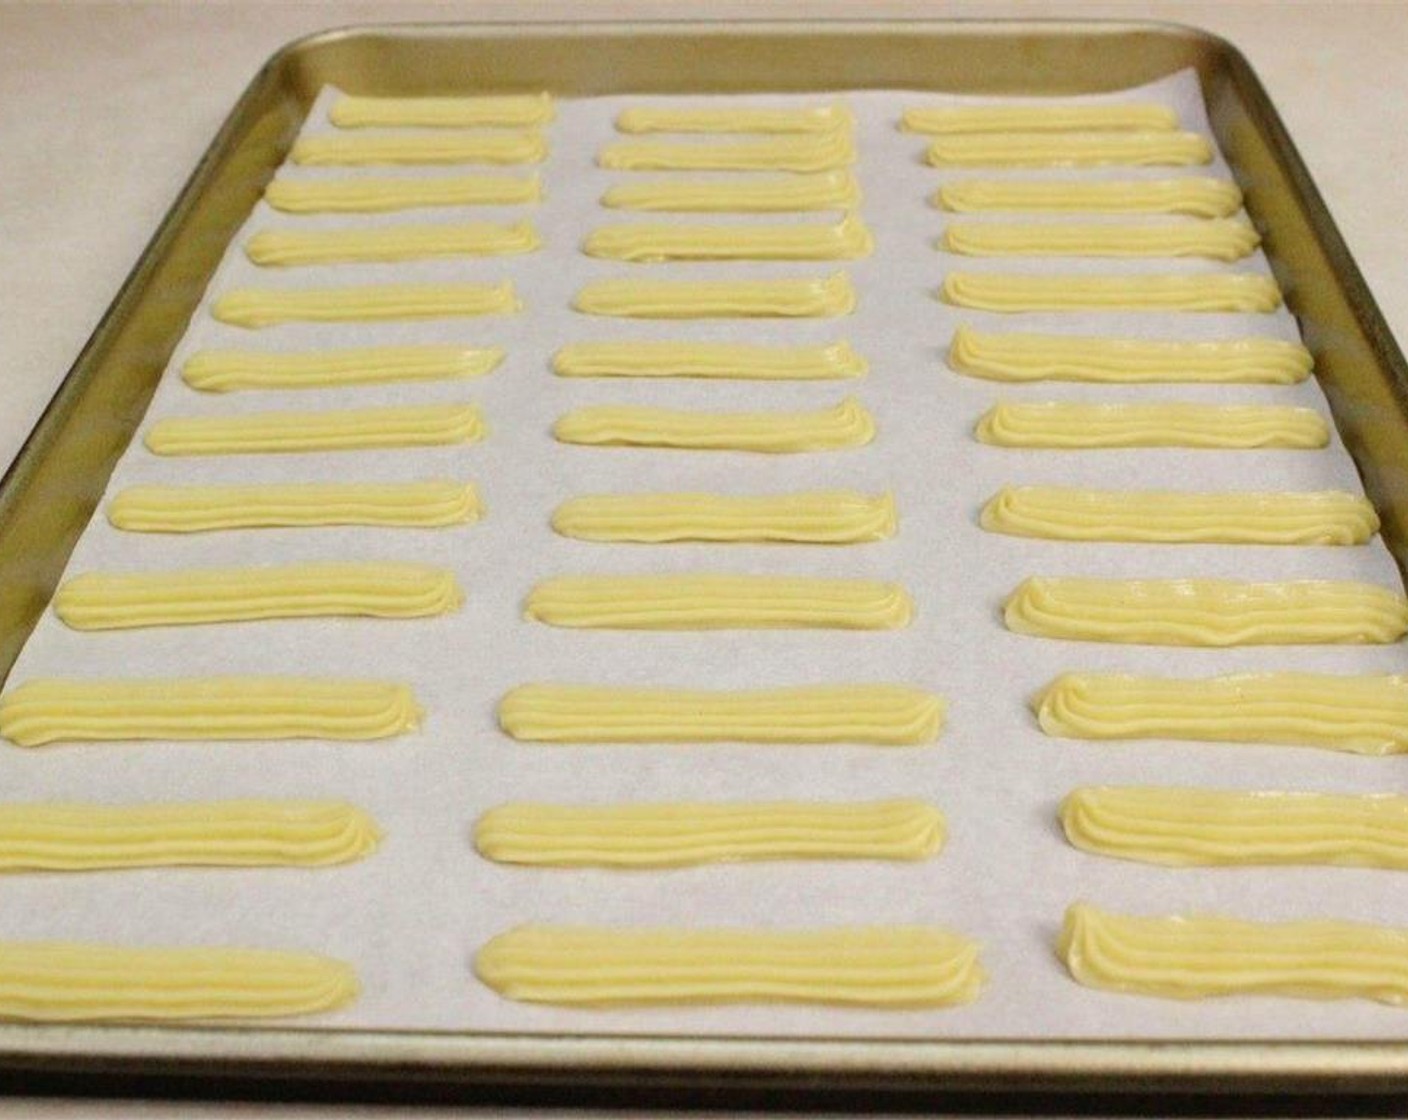 step 5 Transfer the batter to a large ziptop bag or a pastry bag and pipe 2-3 inch long strips, about 1 cm thick onto the prepared baking sheet.